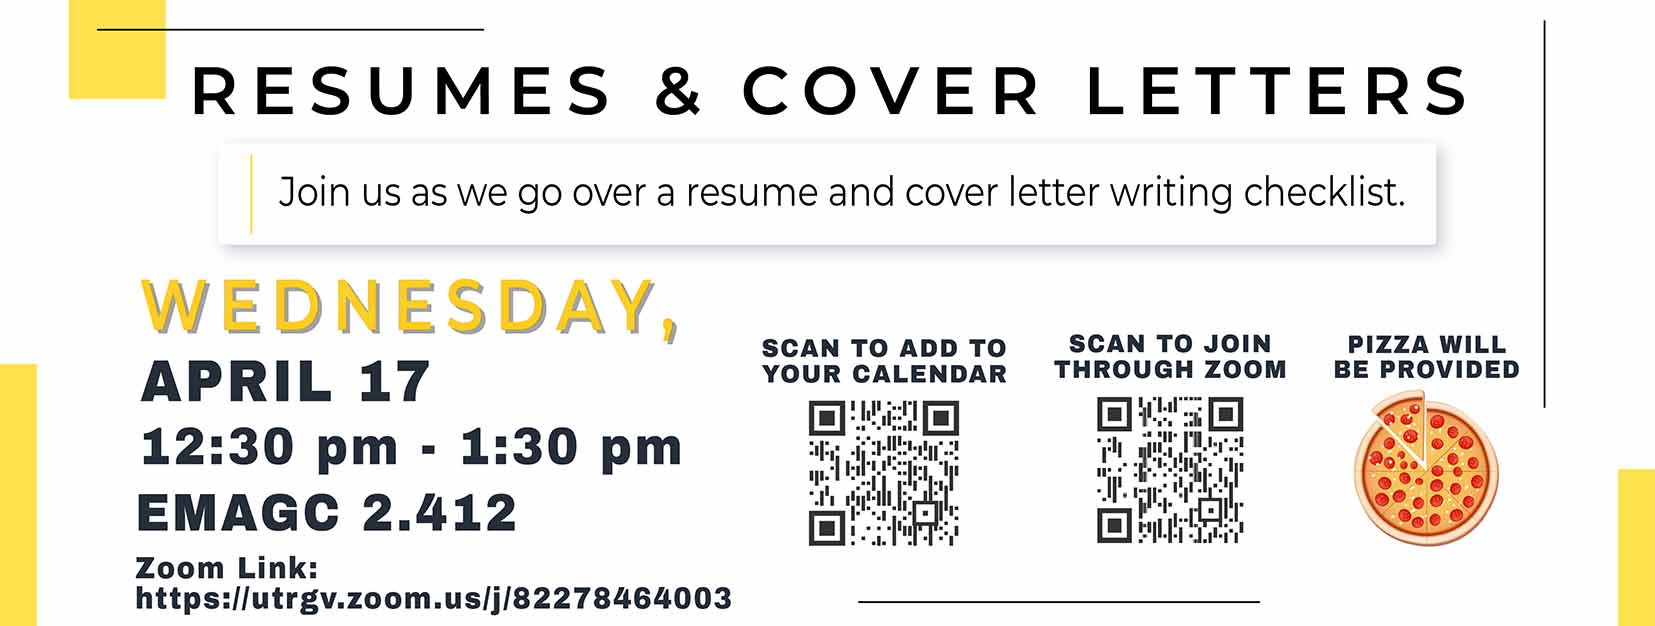 resumes and cover letters workshop